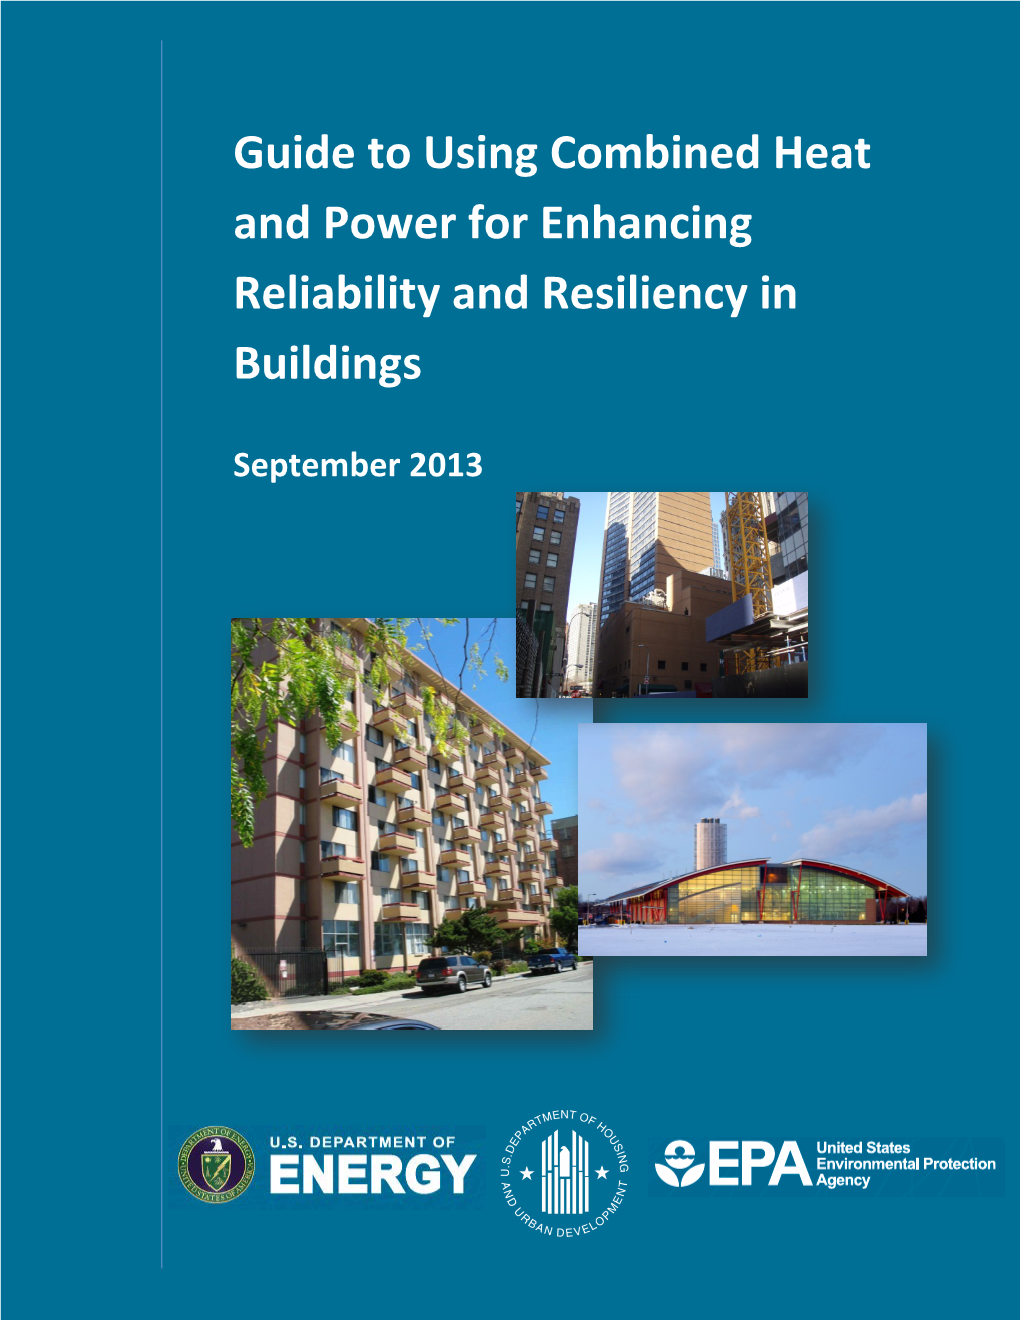 Combined Heat and Power for Enhancing Reliability and Resiliency in Buildings